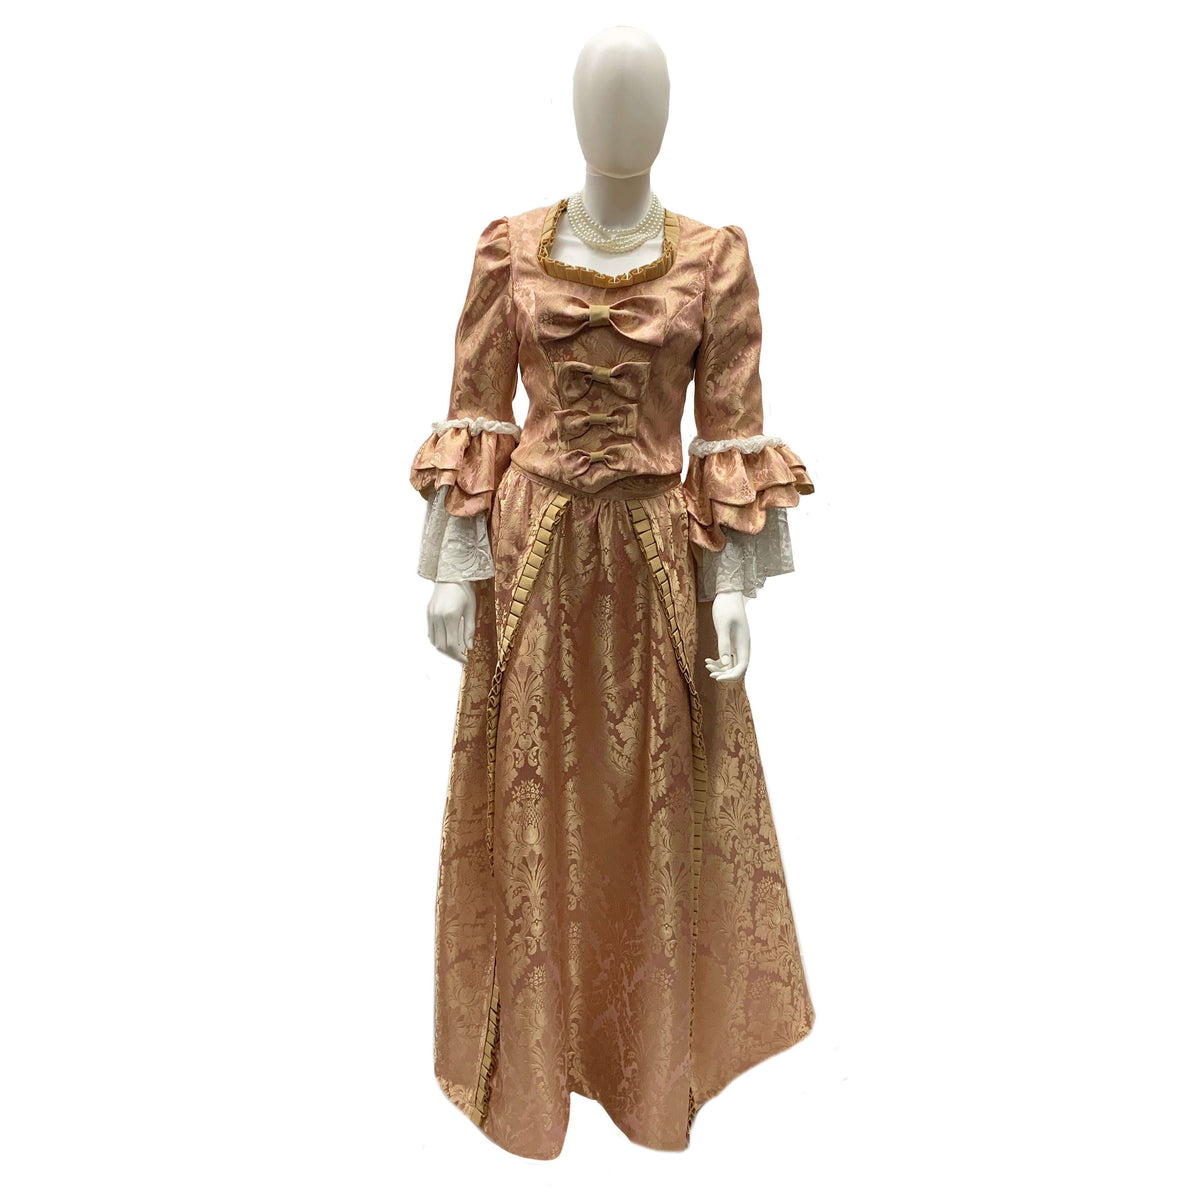 Breathtaking Colonial Peach Women's Adult Costume